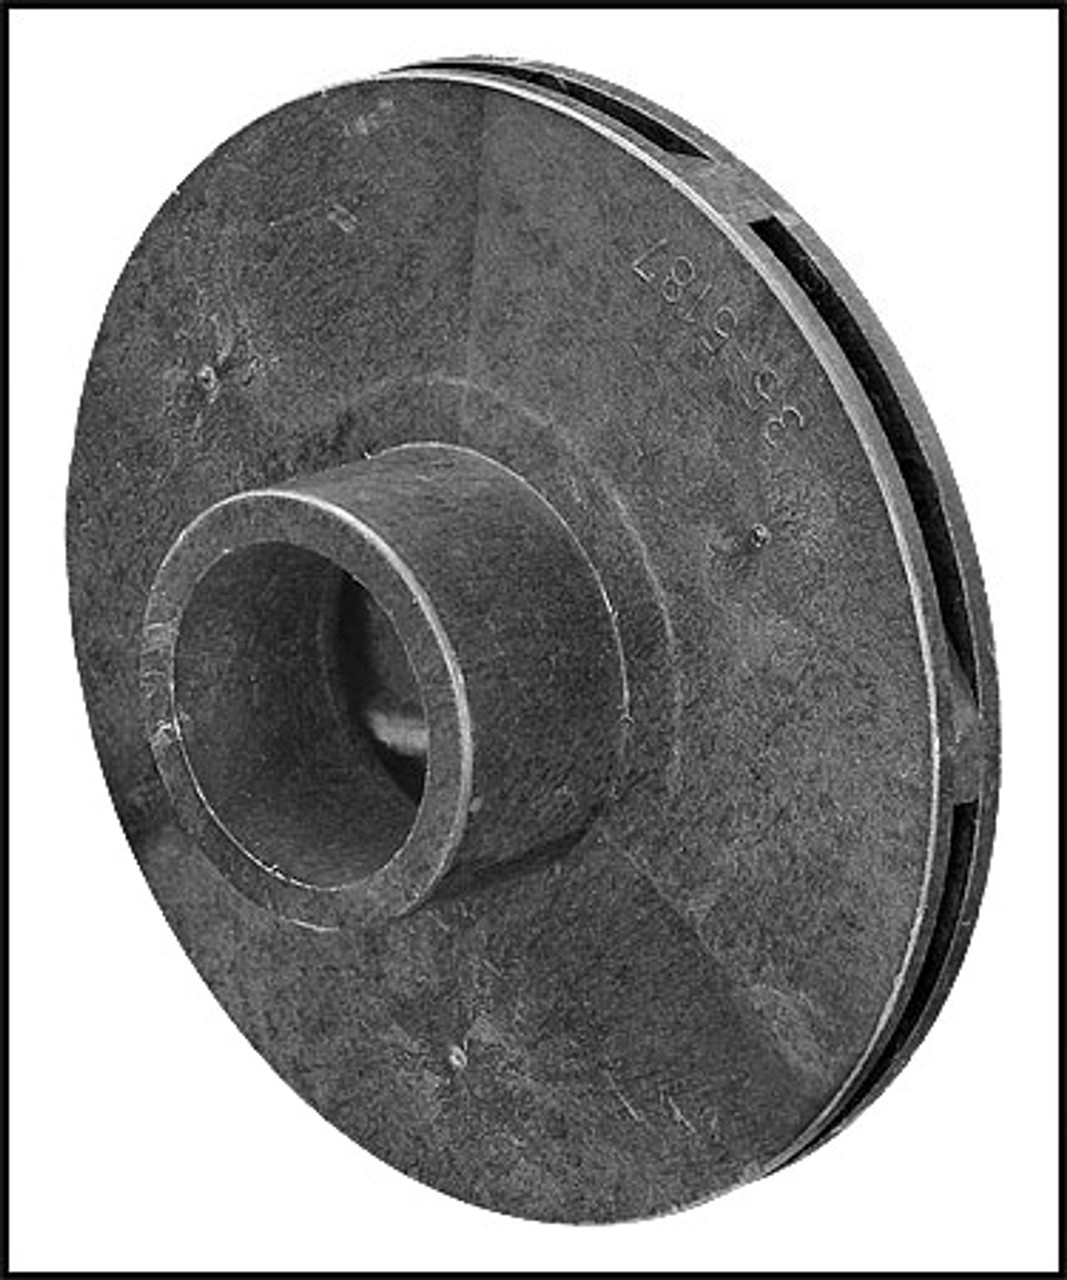 Pentair/PacFab Impeller For 3/4 HP Full Rated/1 HP Up-Rated Pumps (#355187)